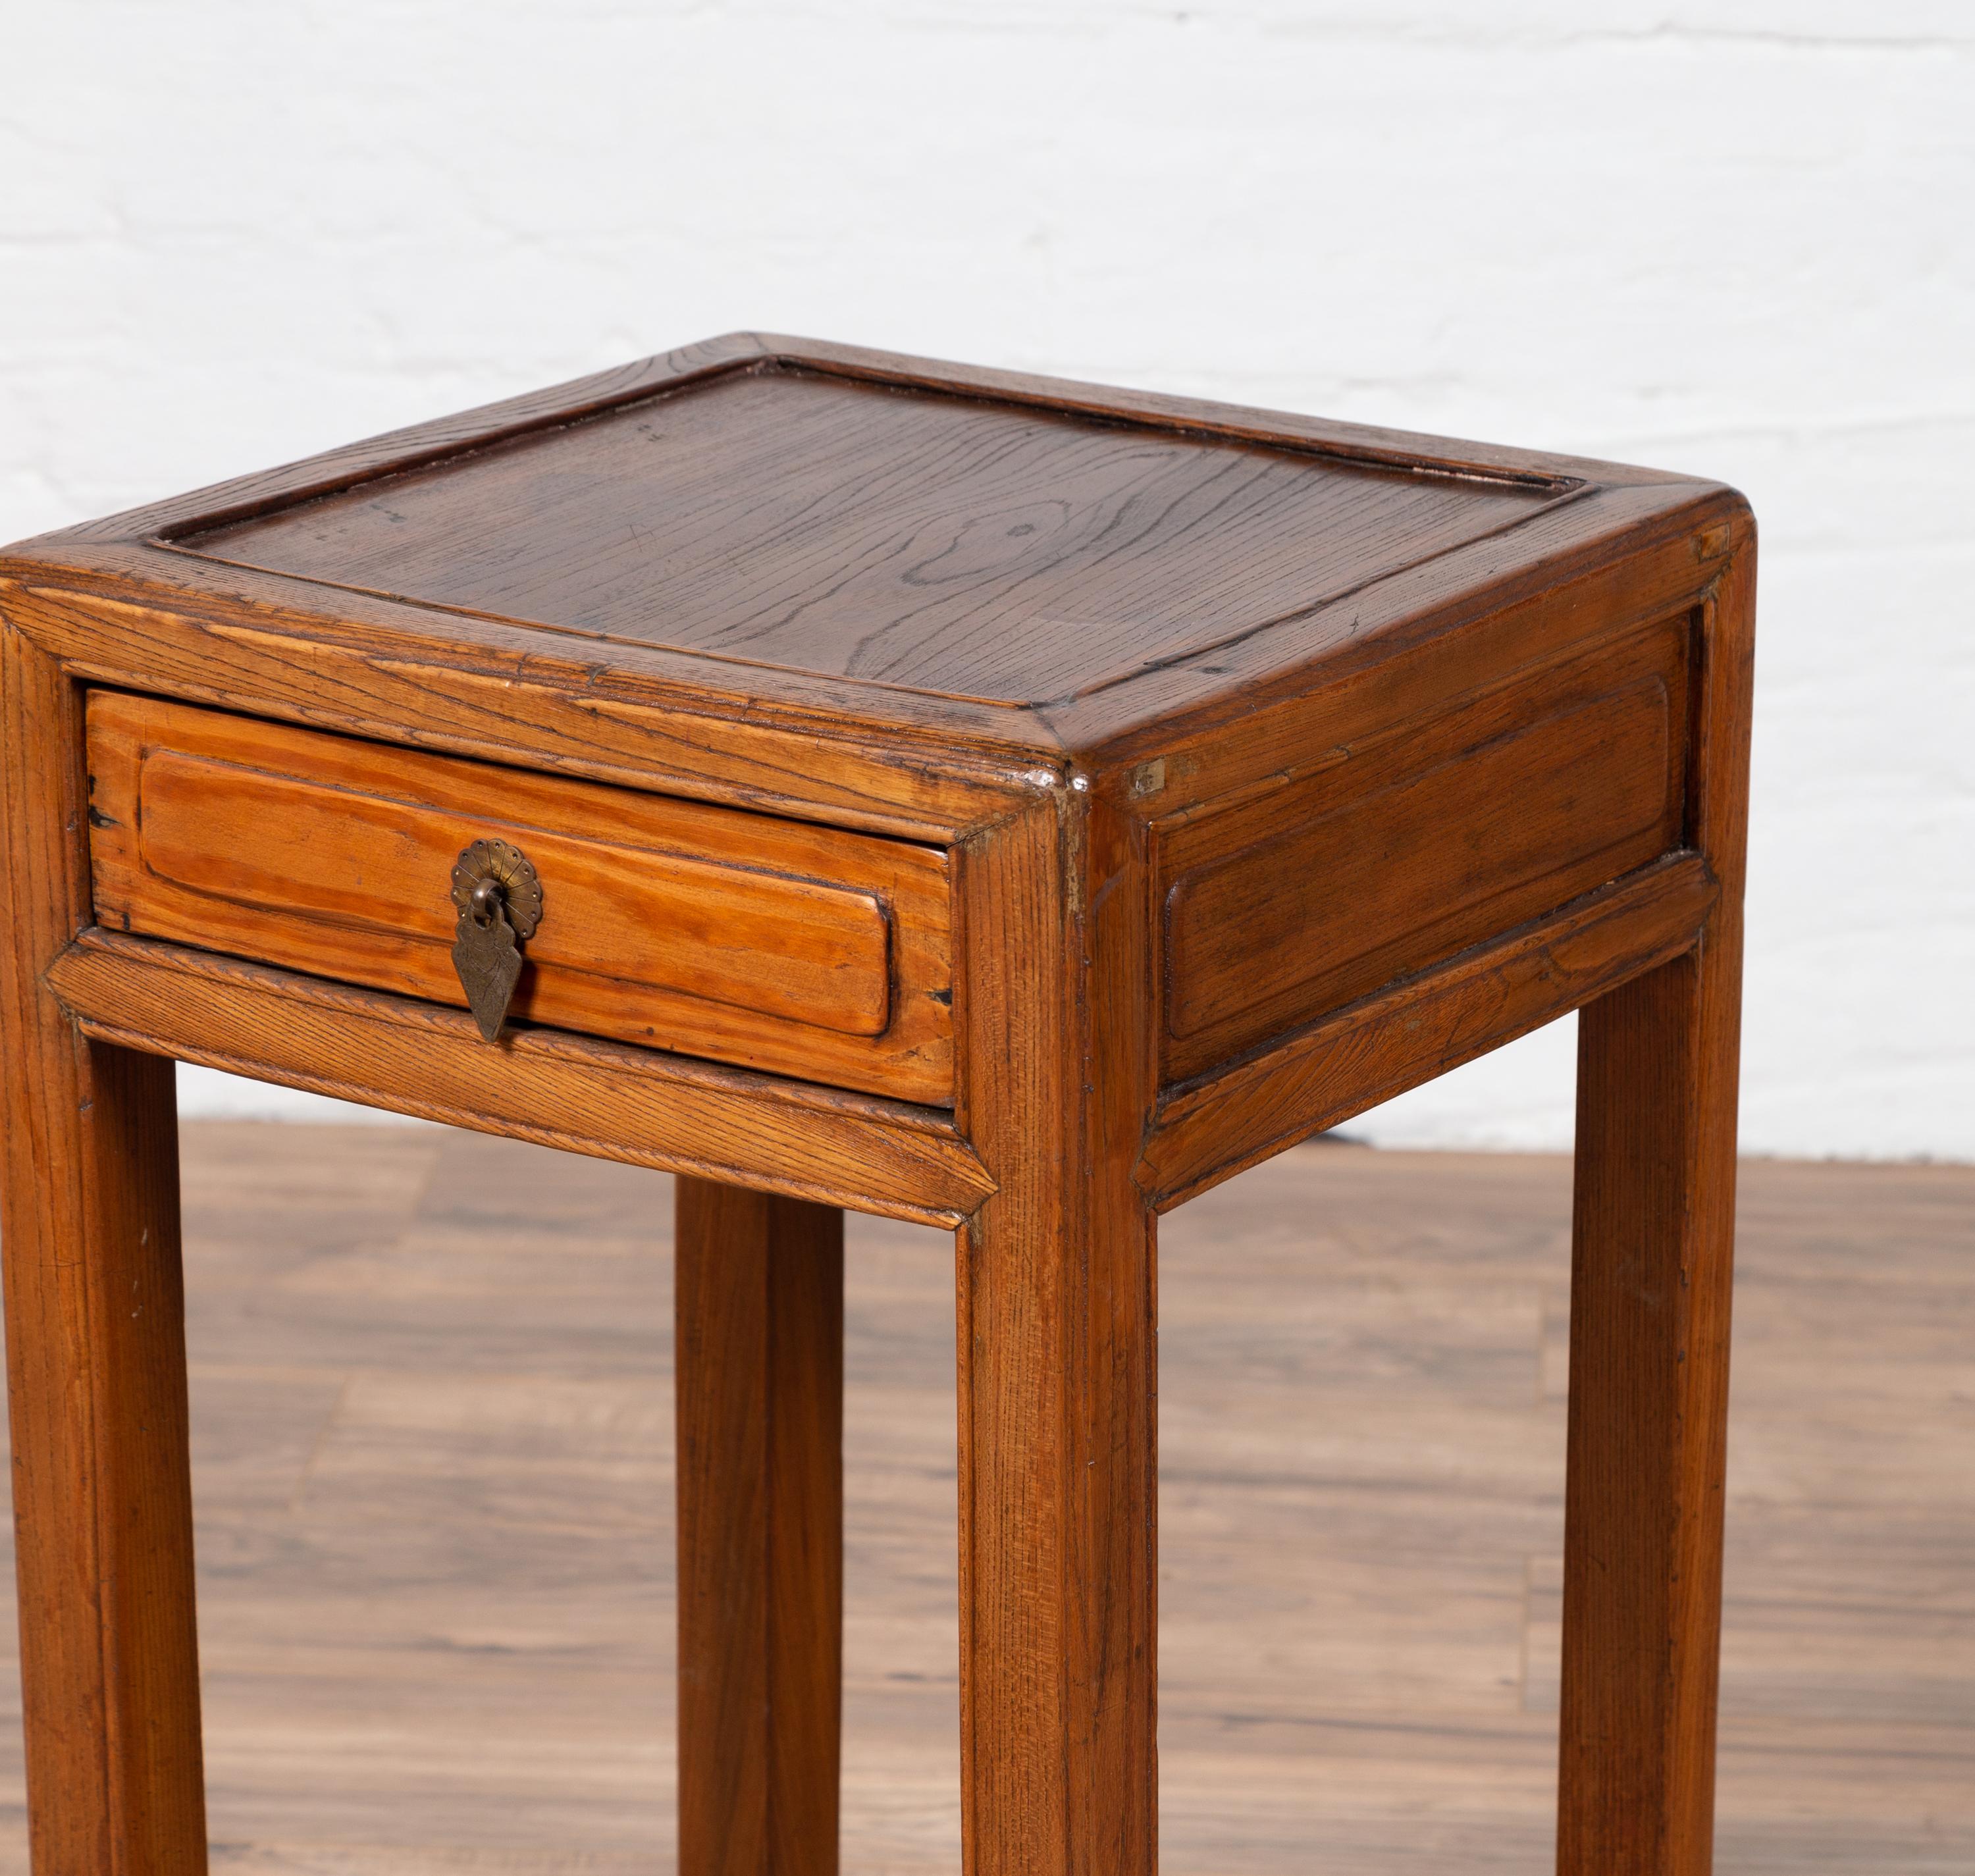 Elmwood Lamp Table with Single Drawer, Horsehoof Feet and Cracked Ice Shelf For Sale 5